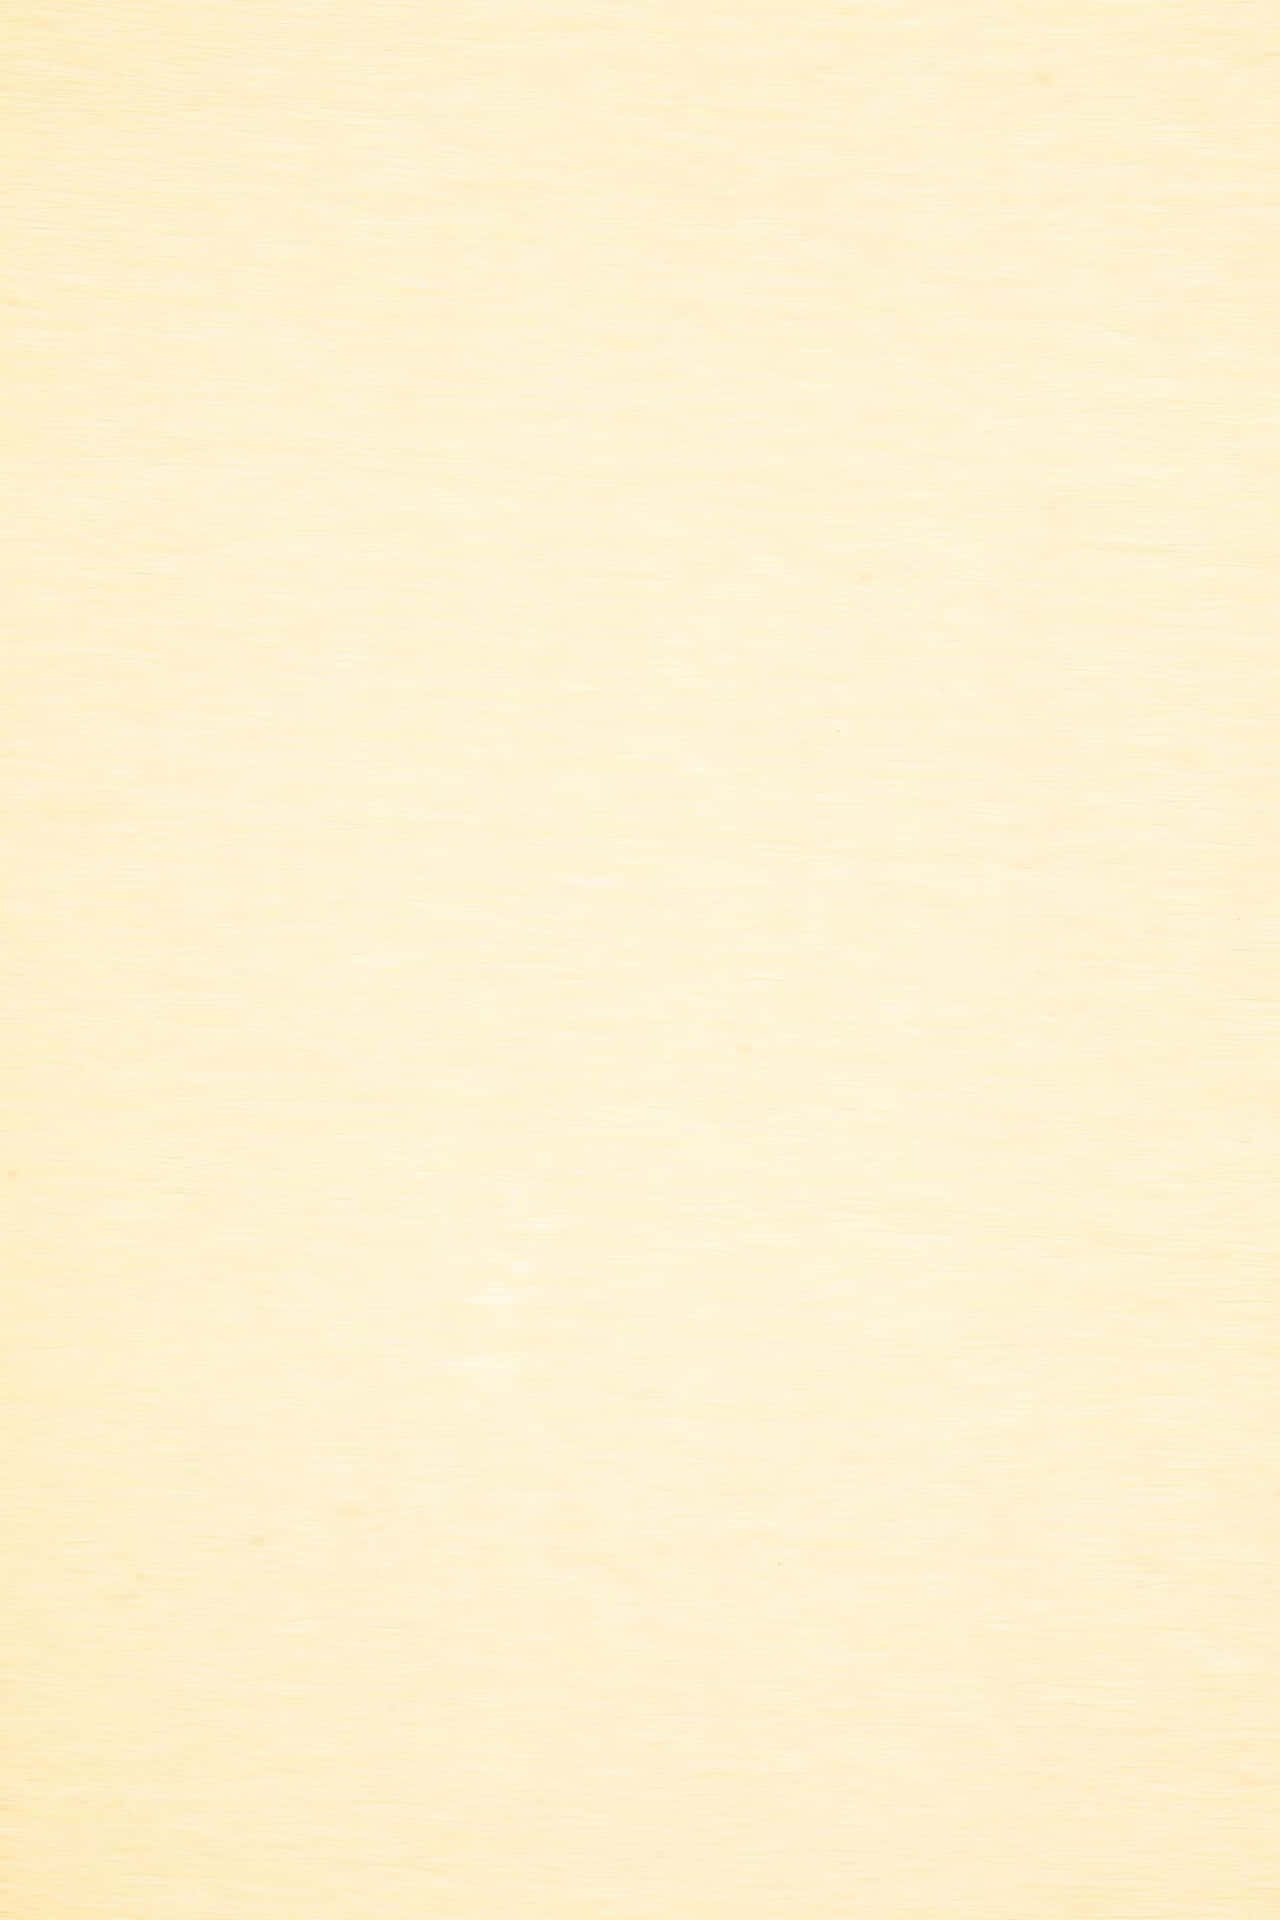 Refreshing Pale Yellow Gradient Background